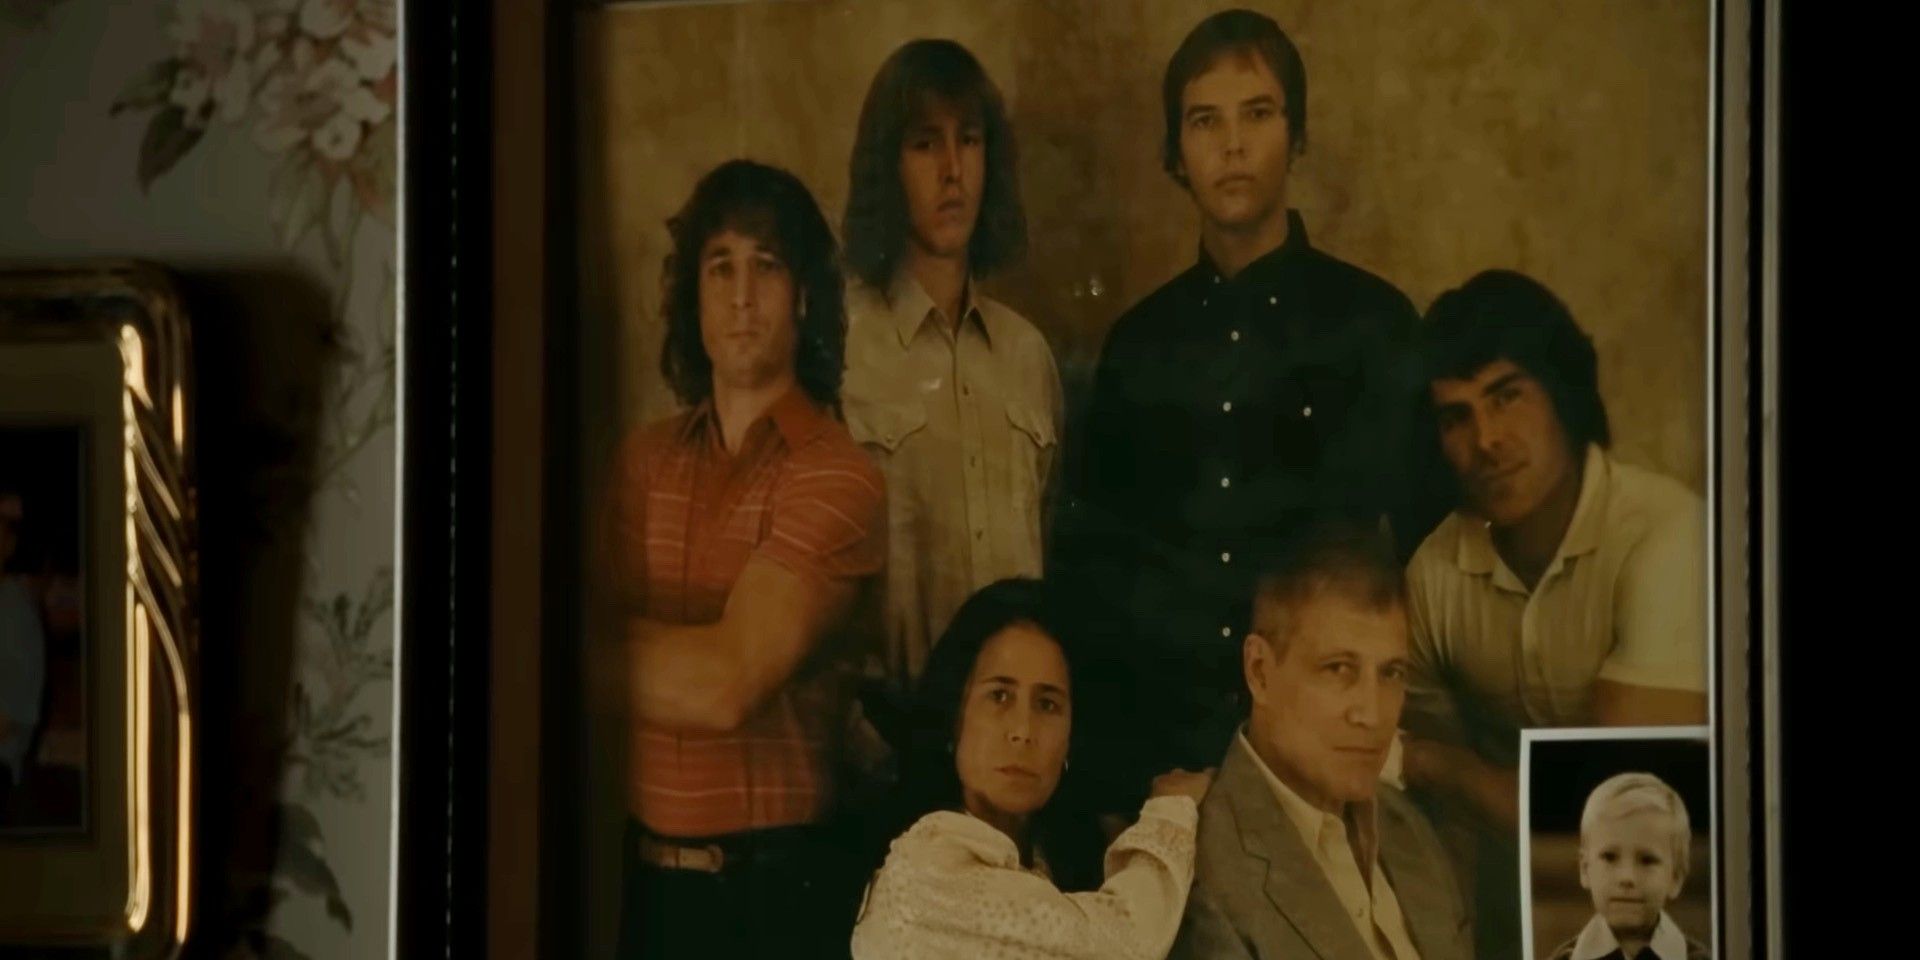 A family photo of the Von Erich family in The Iron Claw